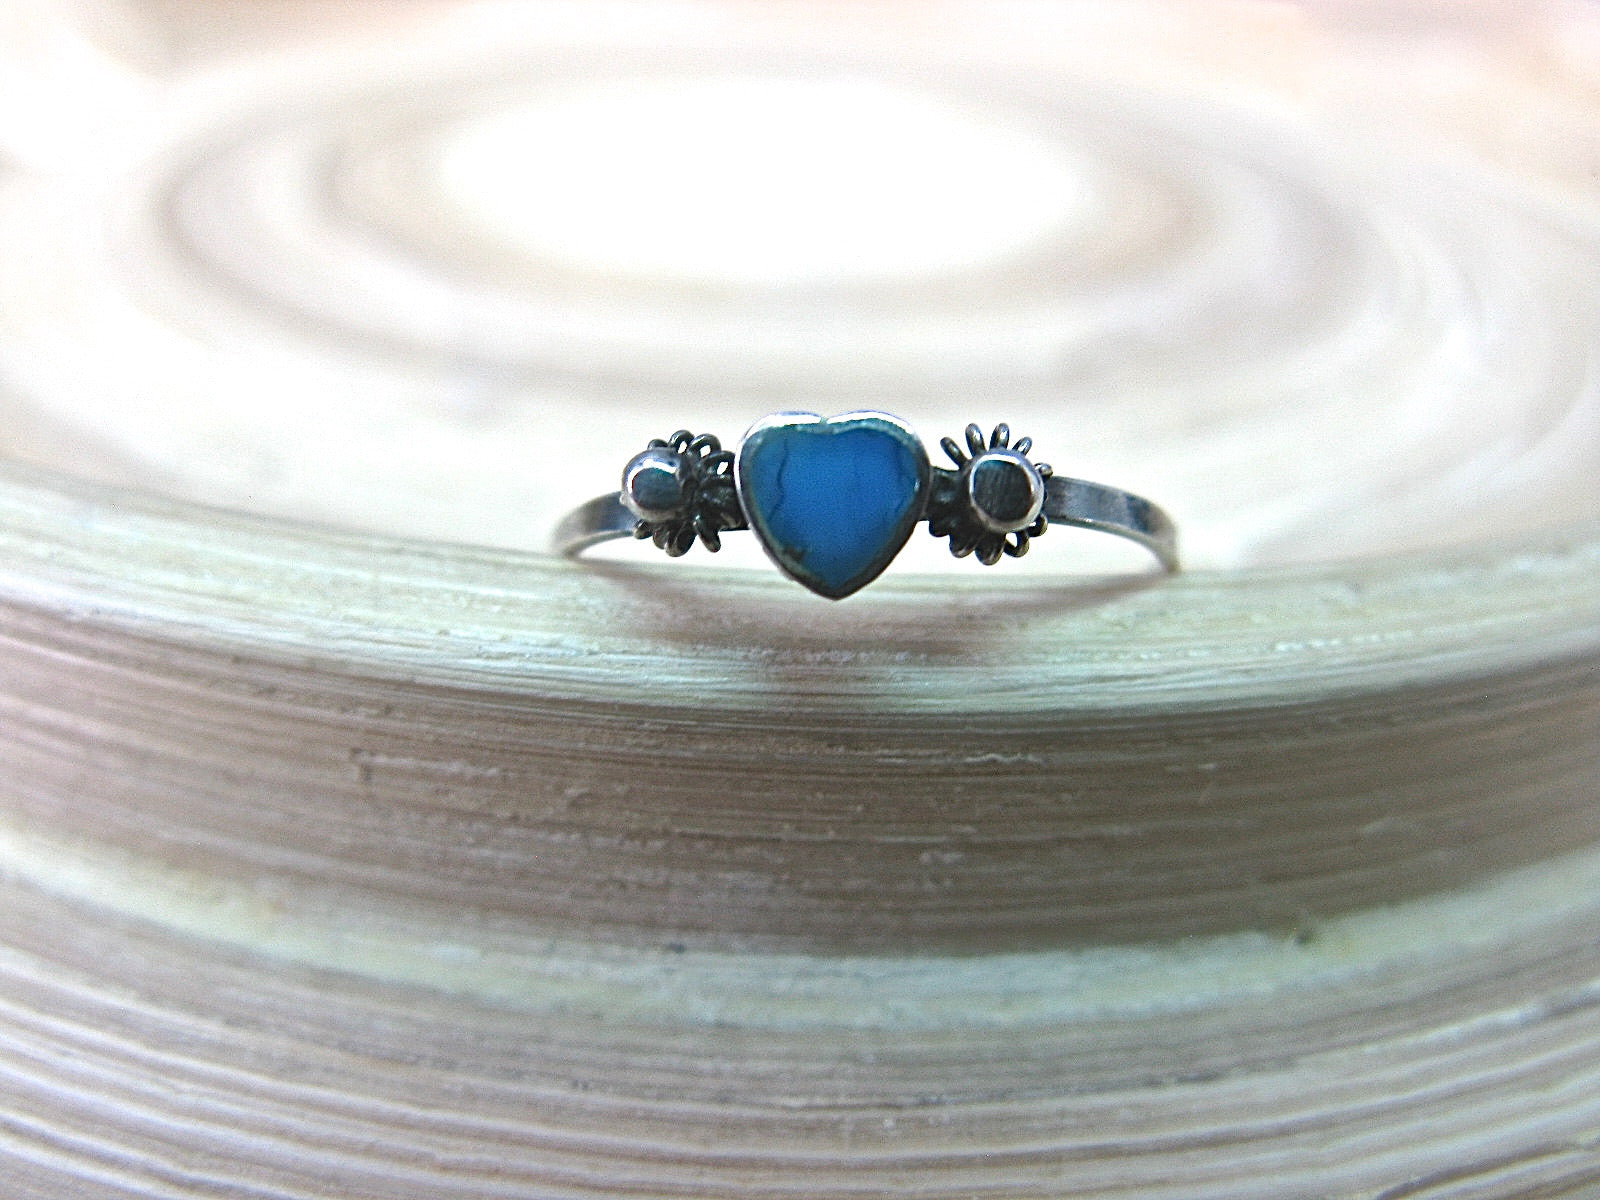 Turquoise Heart Ring Minimalist Jewelry in 925 Sterling Silver